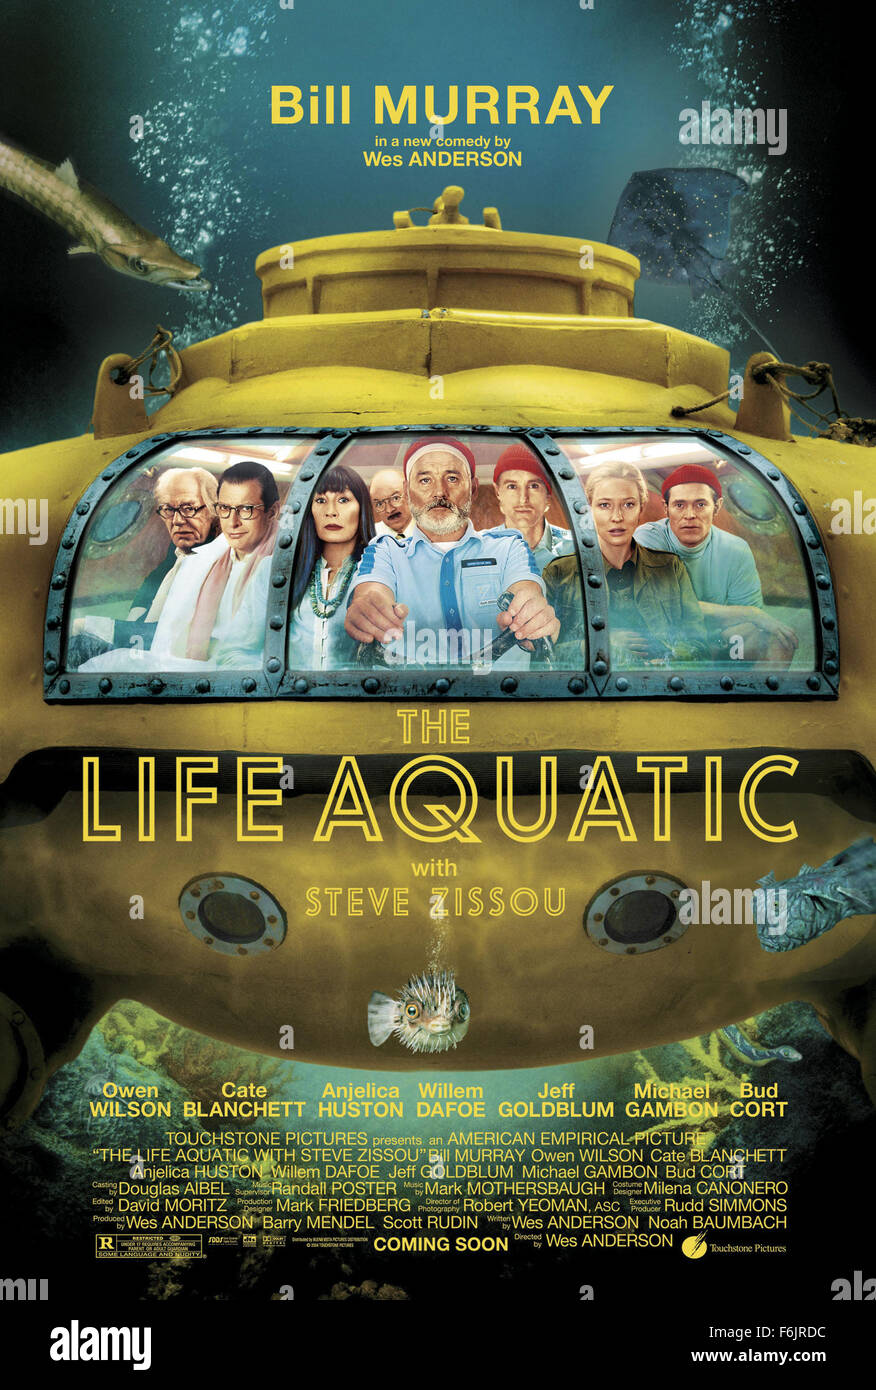 Nov 20, 2004; Rome, Lazio, ITALY; Poster art for the adventure comedy/drama 'The Life Aquatic with Steve Zissou' directed by Wes Anderson. Stock Photo